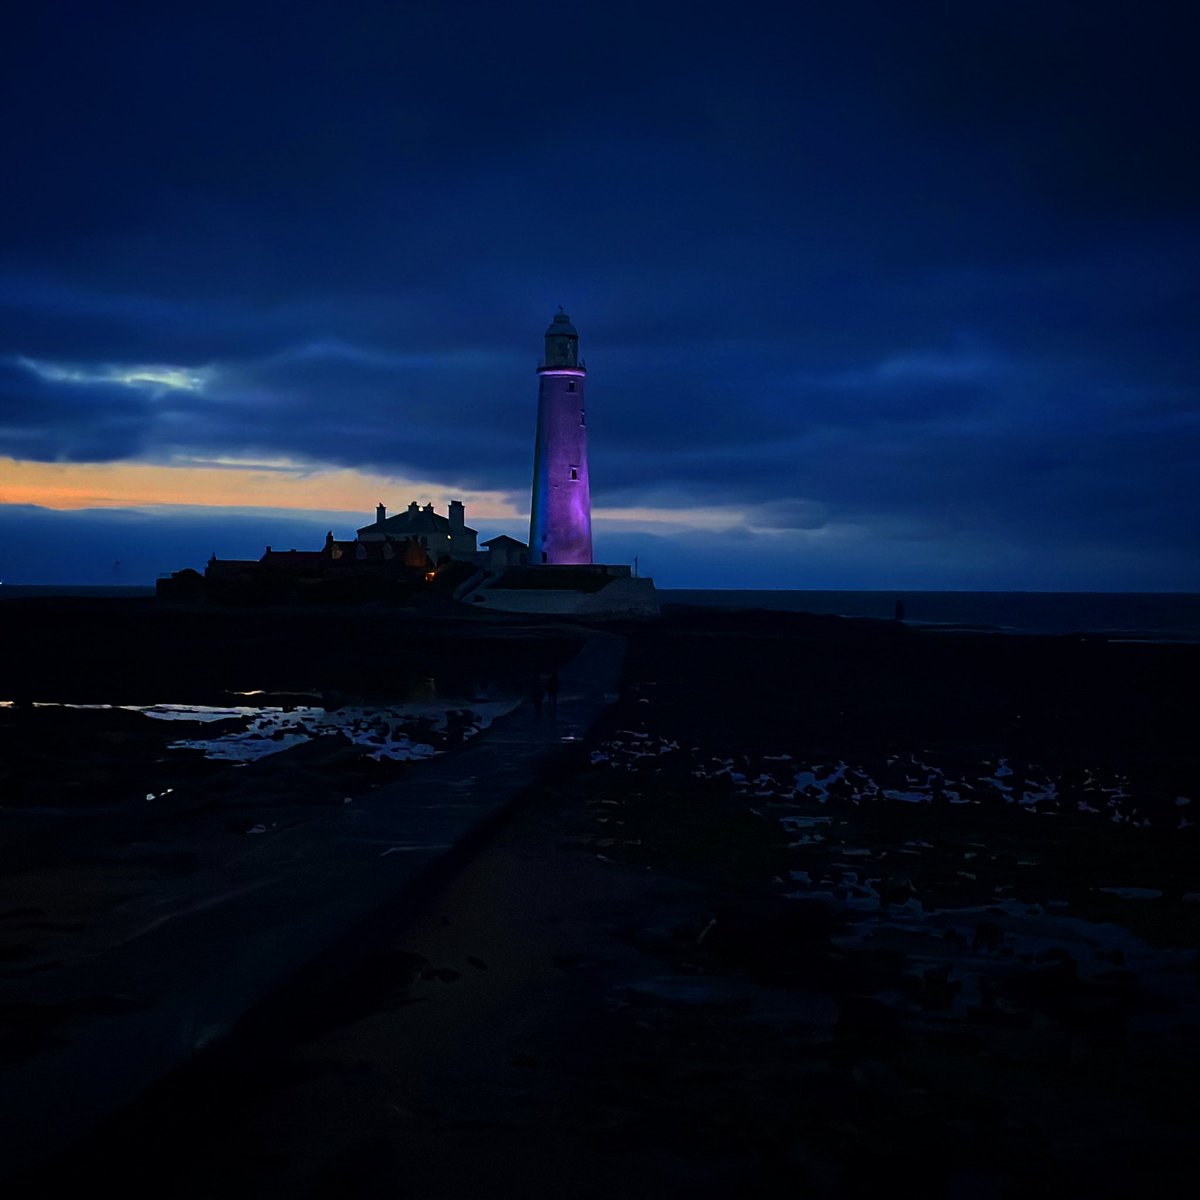 After last night's disappointment it was great to finally see St Mary's Lighthouse turn purple to celebrate the Platinum Jubilee tonight. #stmaryslighthouse #stmarysisland #whitleybay #platinumjubilee #godsavethequeen #queenelizabethii